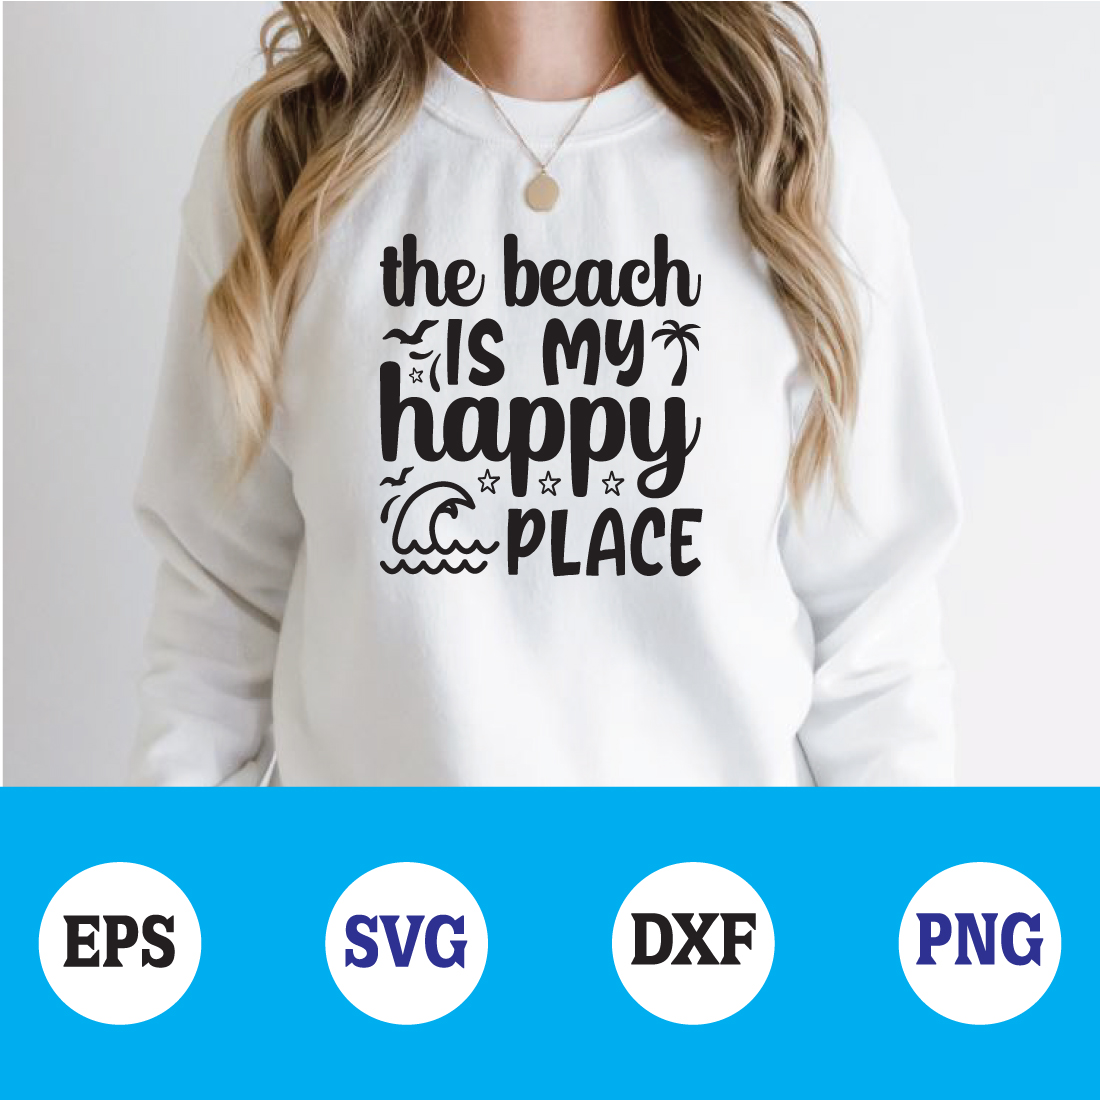 the beach is my happy place svg cover image.